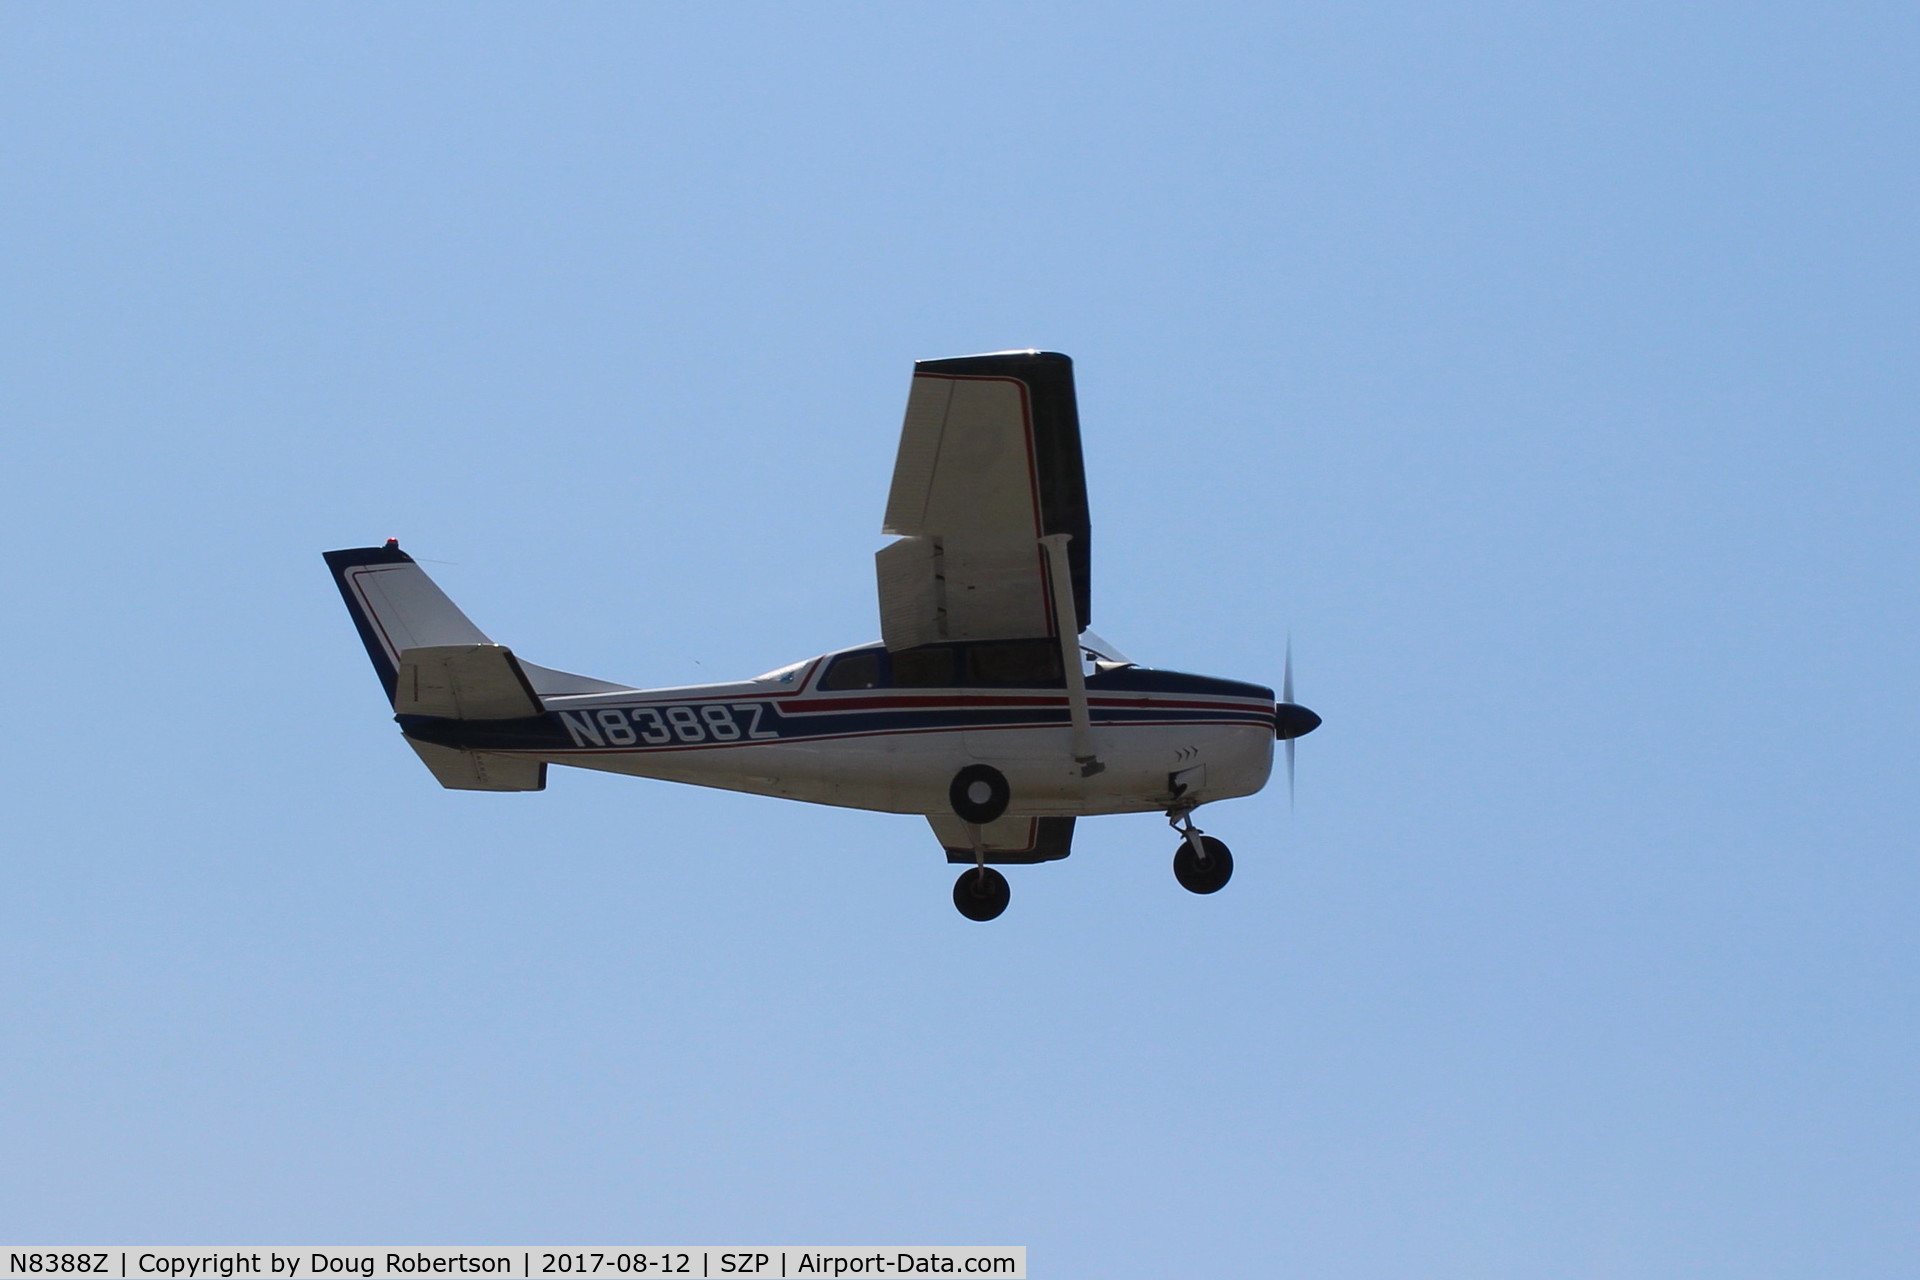 N8388Z, 1963 Cessna 210-5 C/N 205-0388, 1963 Cessna 210-5 (205)(fixed-gear version of 210C), Continental IO-470-E 260 Hp, overflight Rwy 22. Advantages-more interior room, lower insurance cost-no gear-up landings!